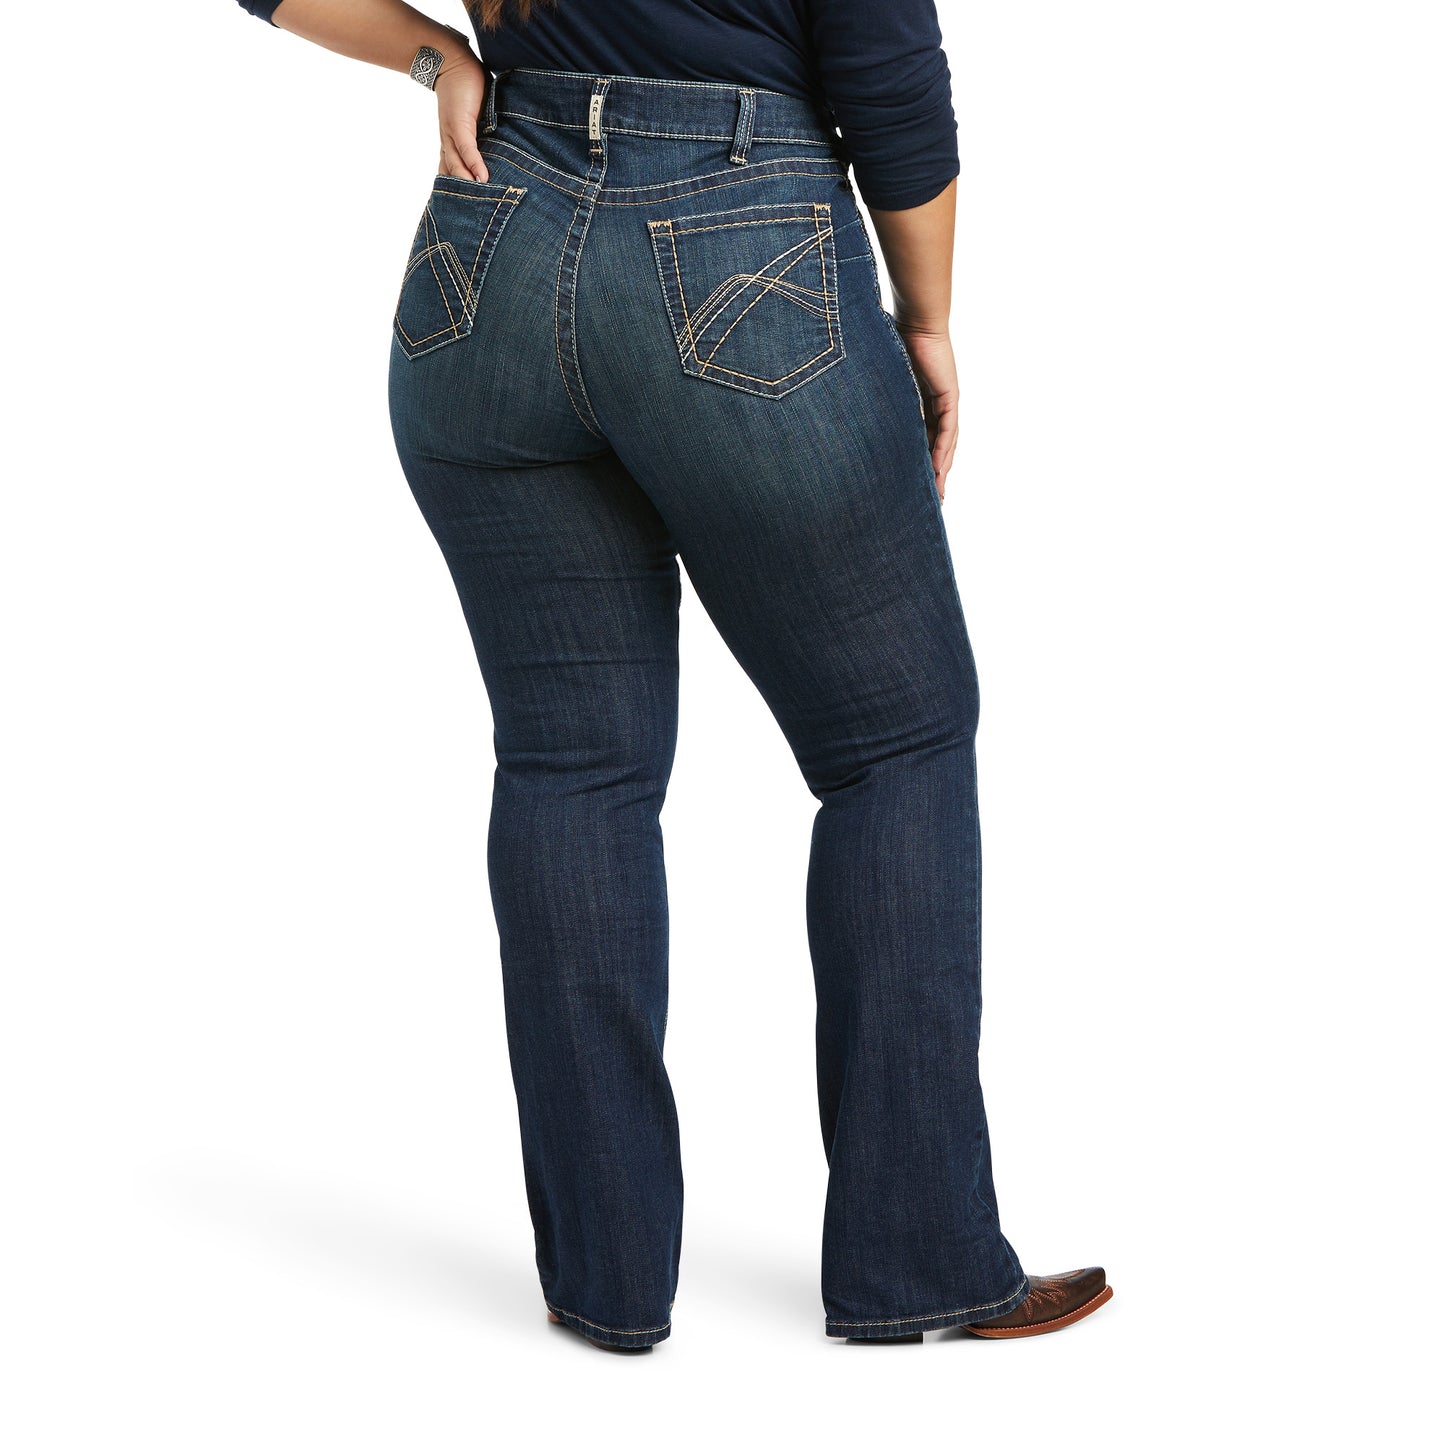 Ariat REAL Bootcut Jeans- Pacific